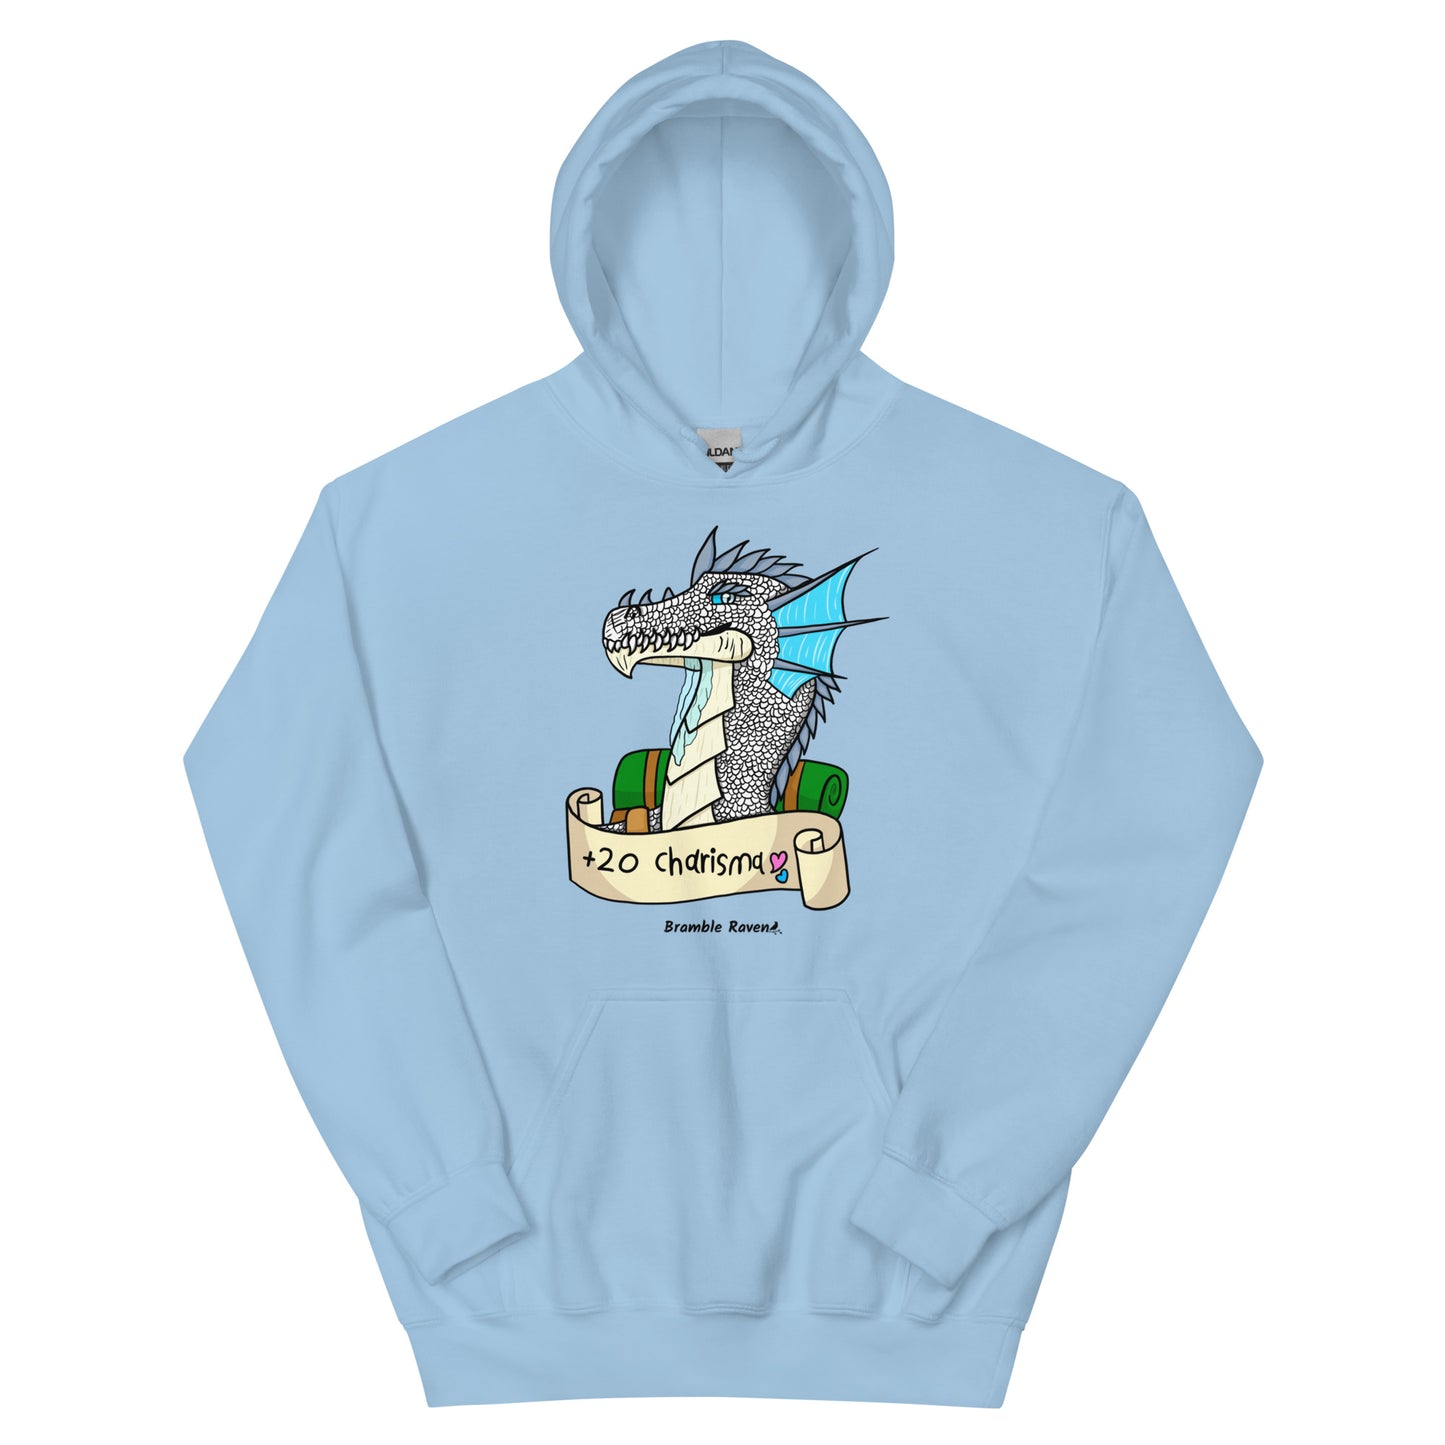 Original Bicycle the Bard dragon +20 Charisma design on unisex light blue colored hoodie.